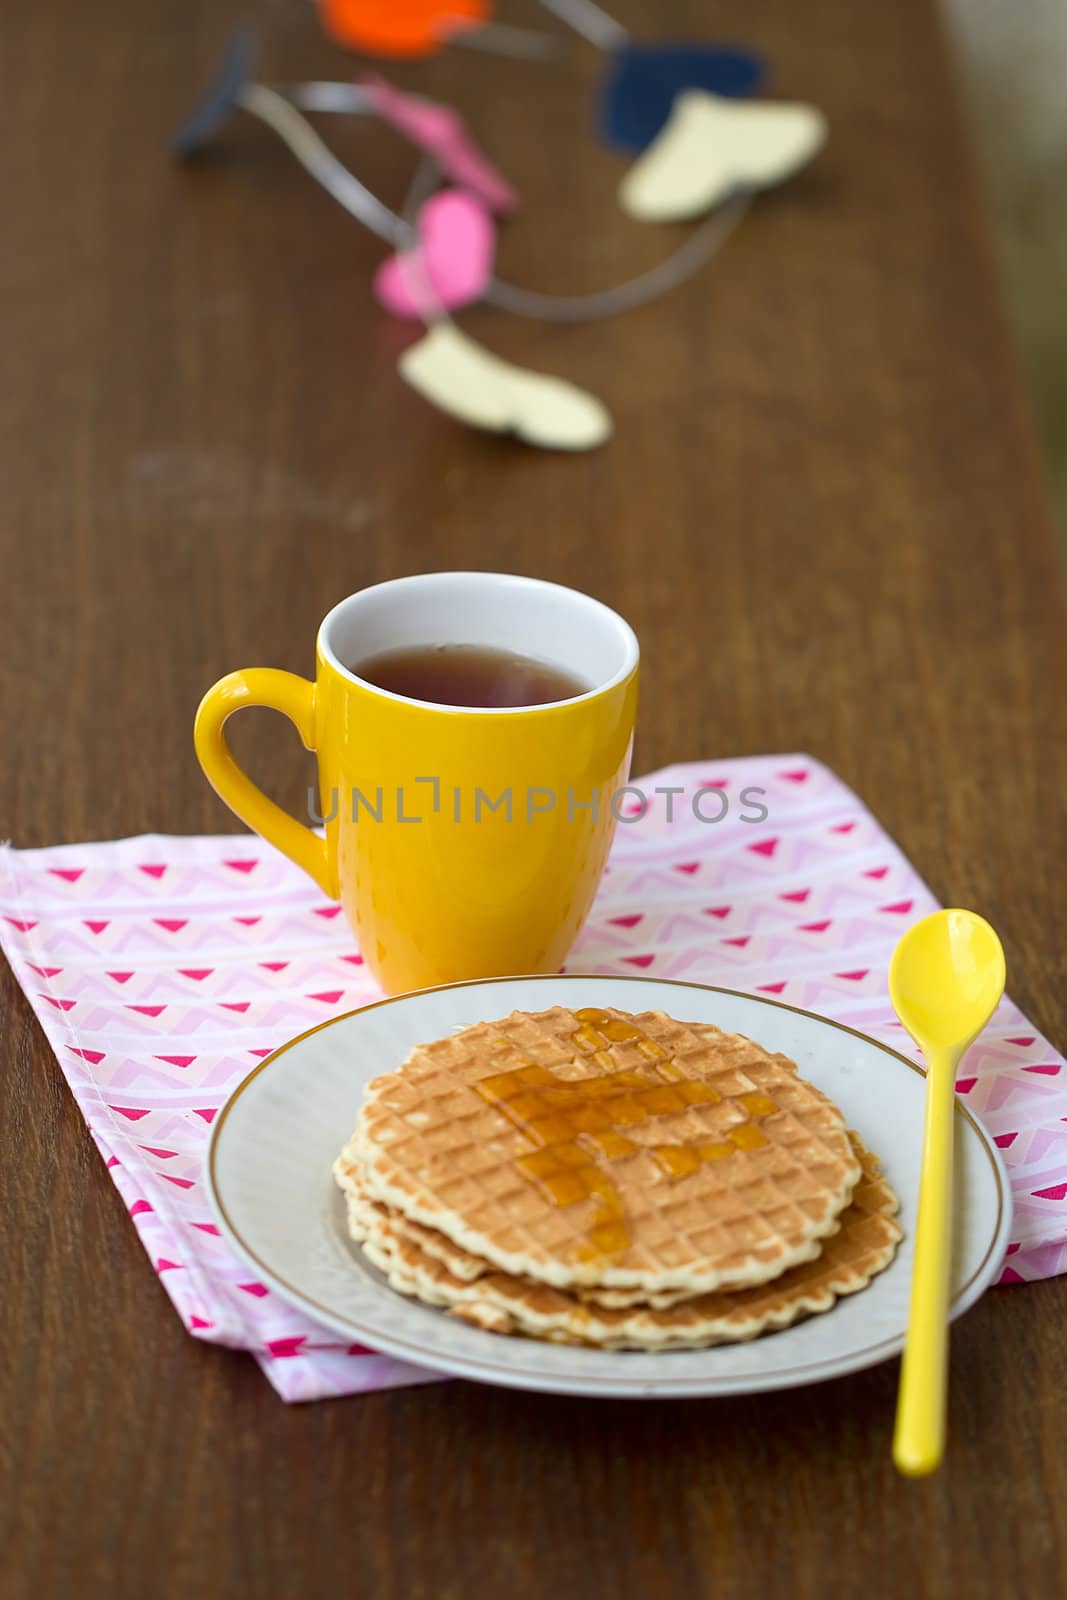 Round wafers, yellow cup with a spoon on a napkin, with a heart of paper in the background